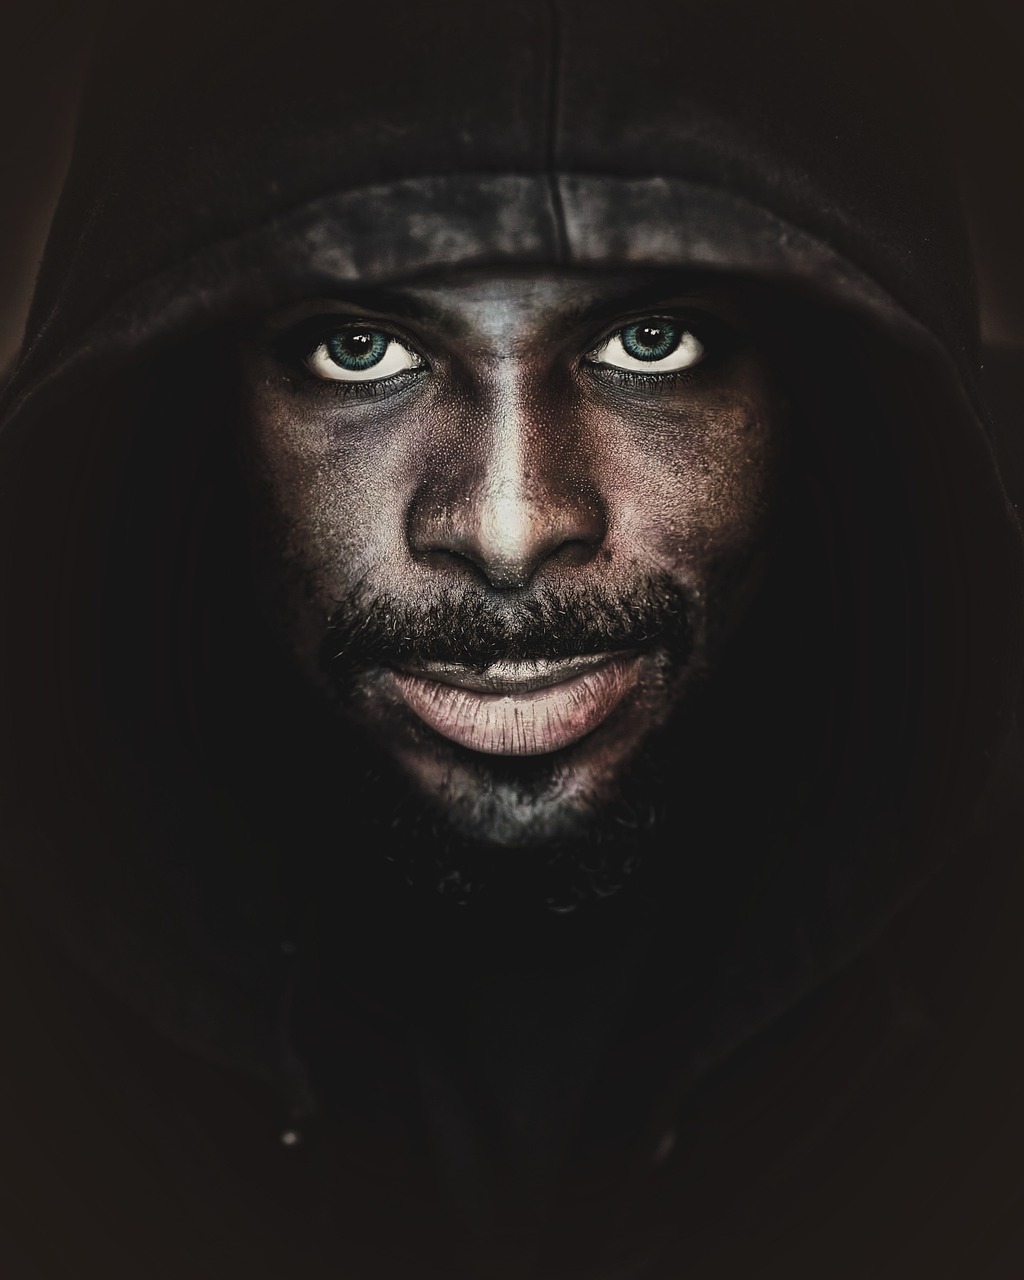 a close up of a person wearing a hoodie, a character portrait, inspired by Lee Jeffries, digital art, man is with black skin, fantasy character photo, fierce expression, full face and body portrait